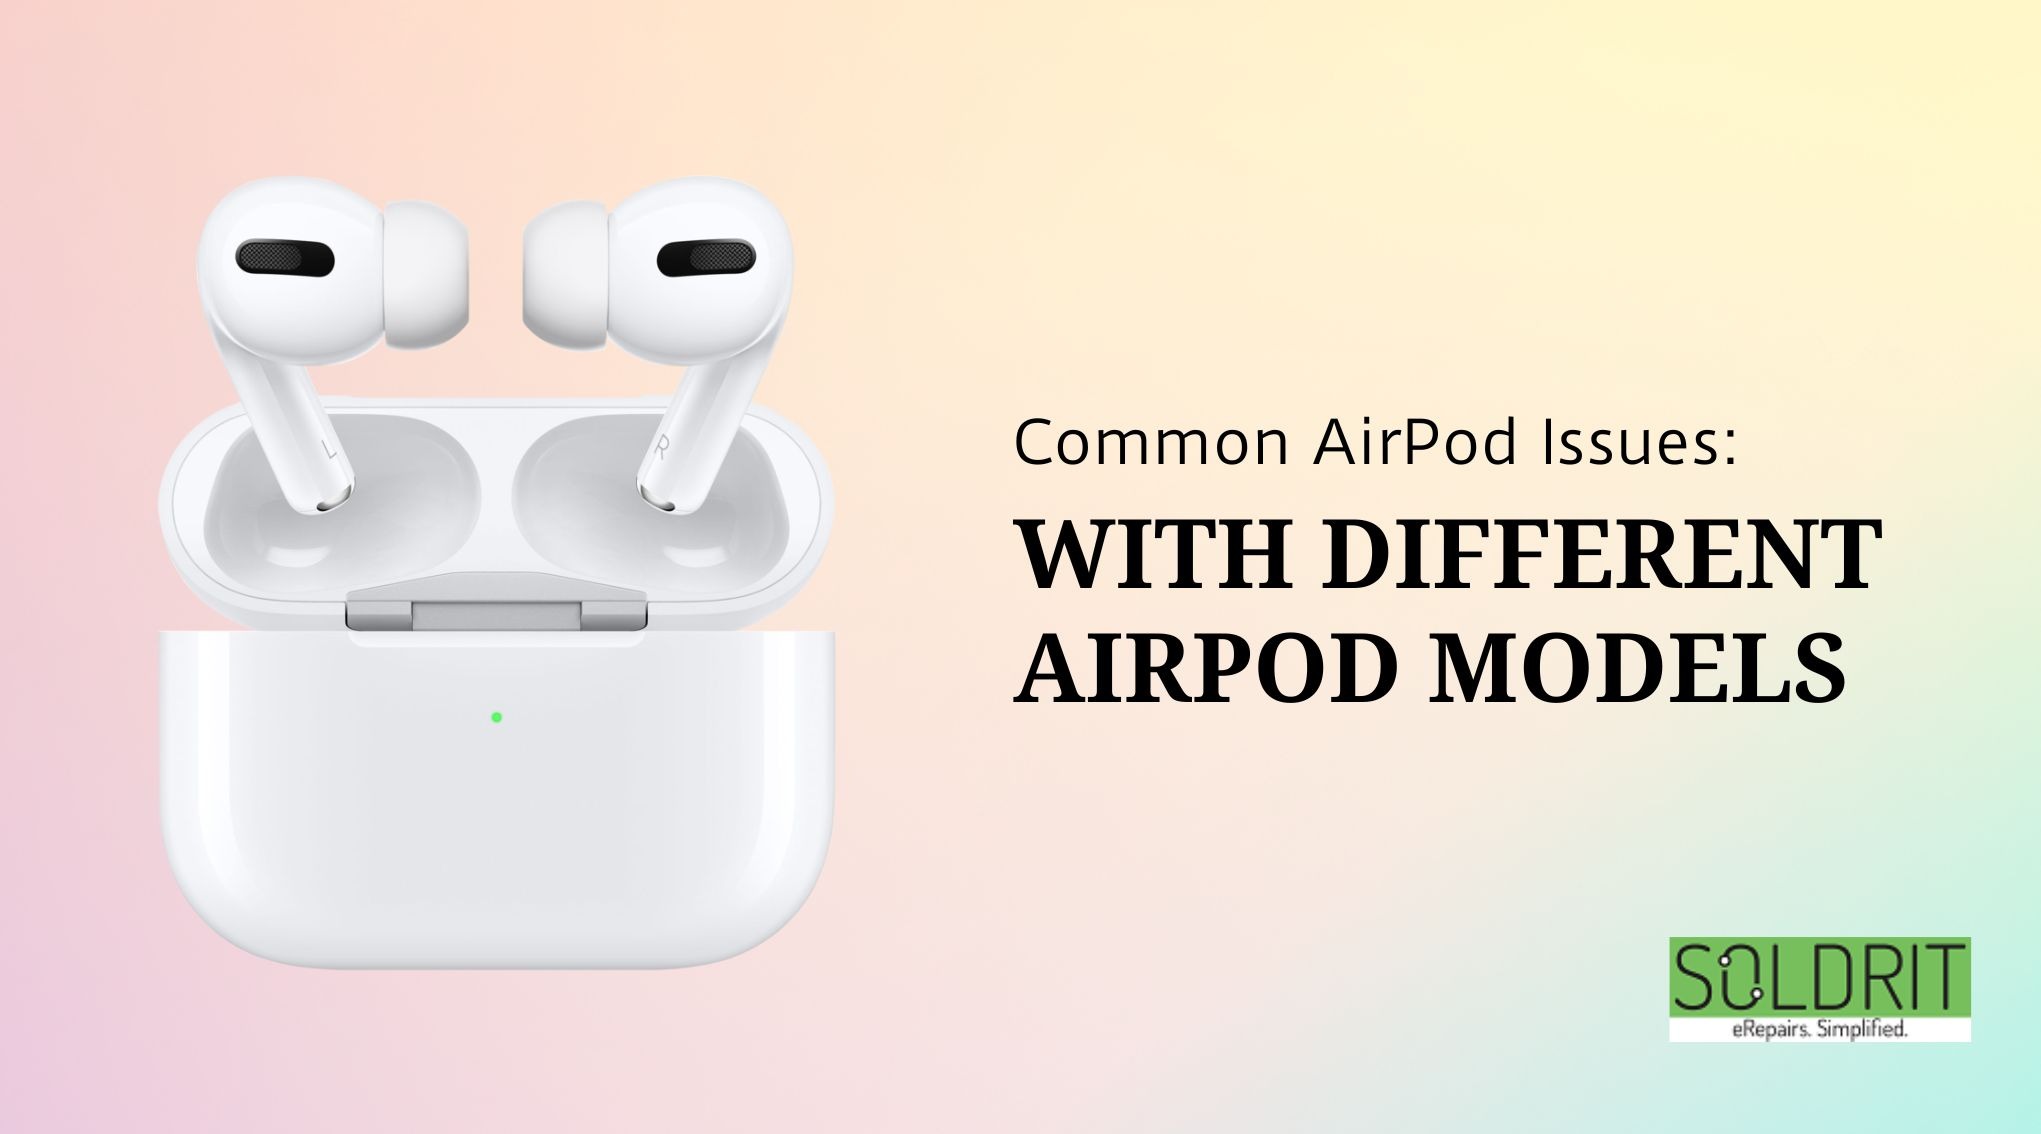 AirPod Repair in Bangalore: Addressing Common AirPod Issues